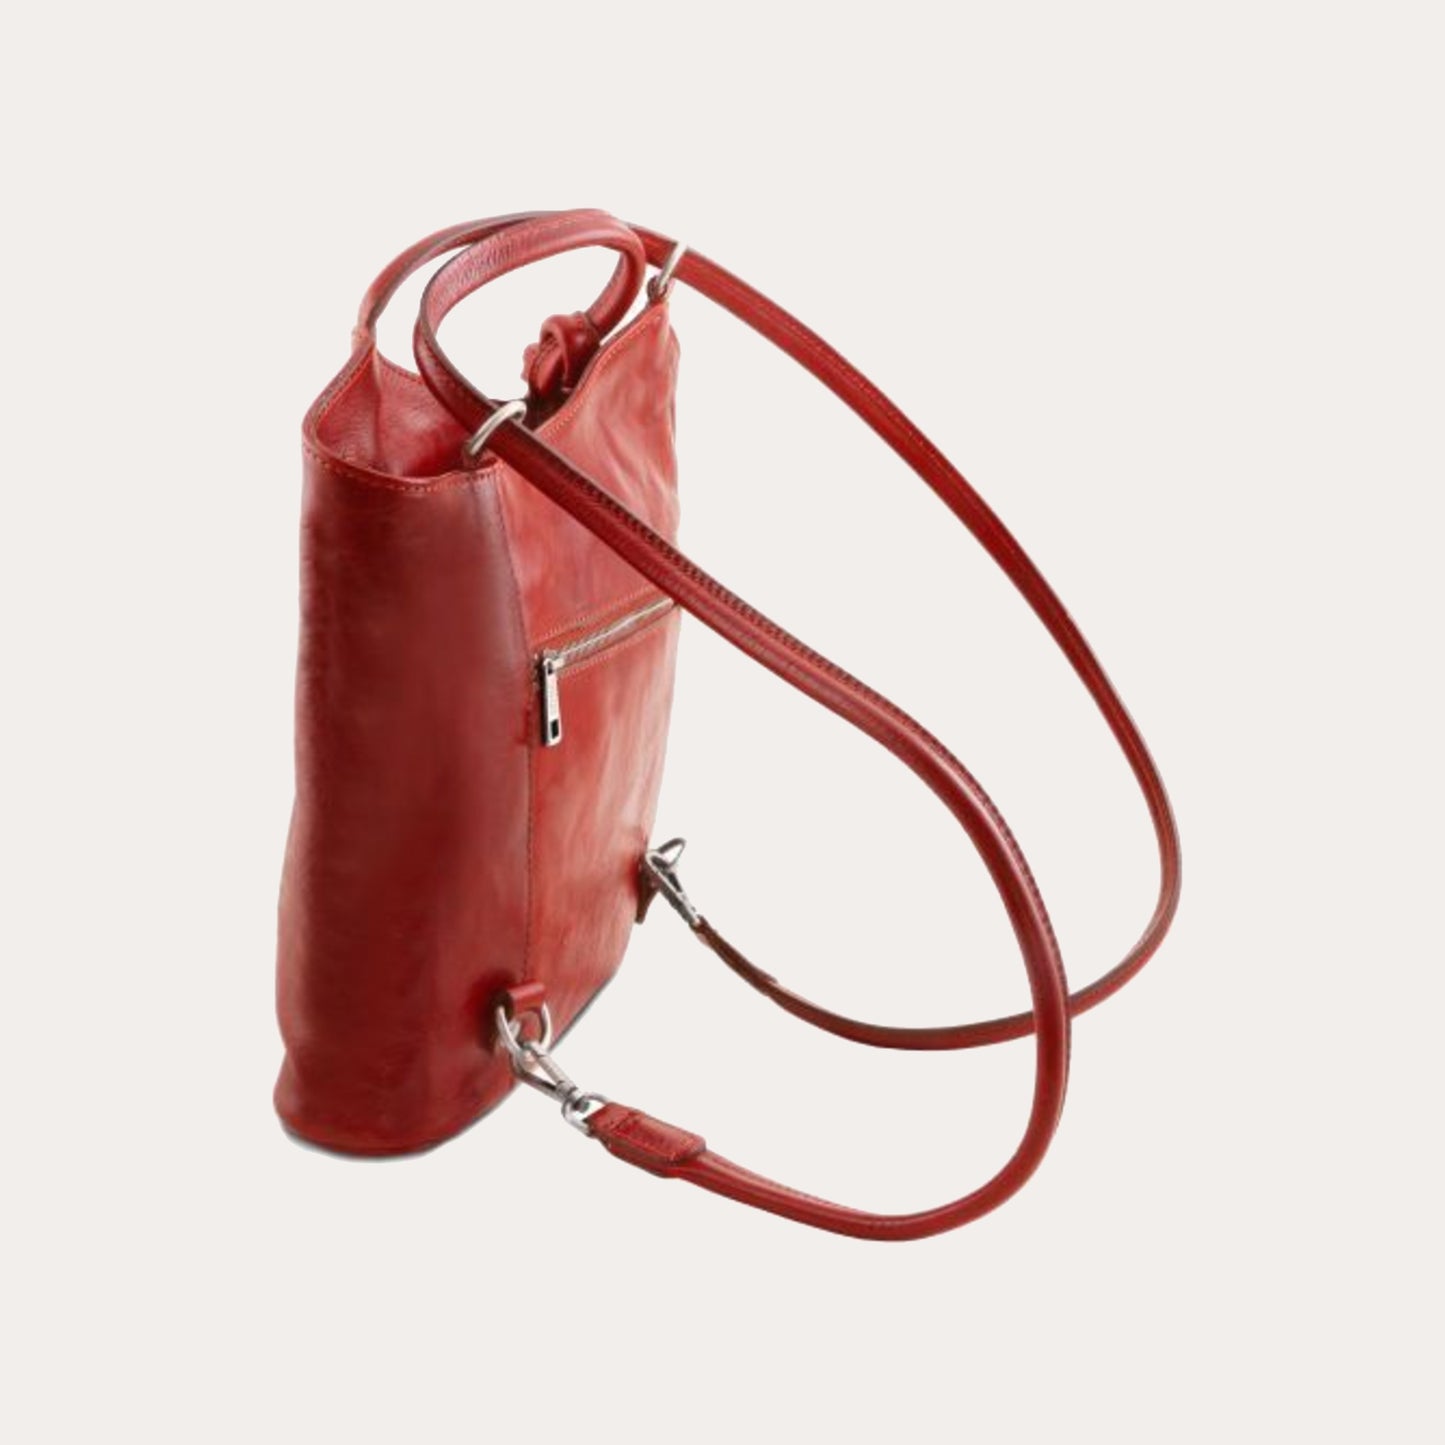 Tuscany Leather Red Leather Convertible Backpack